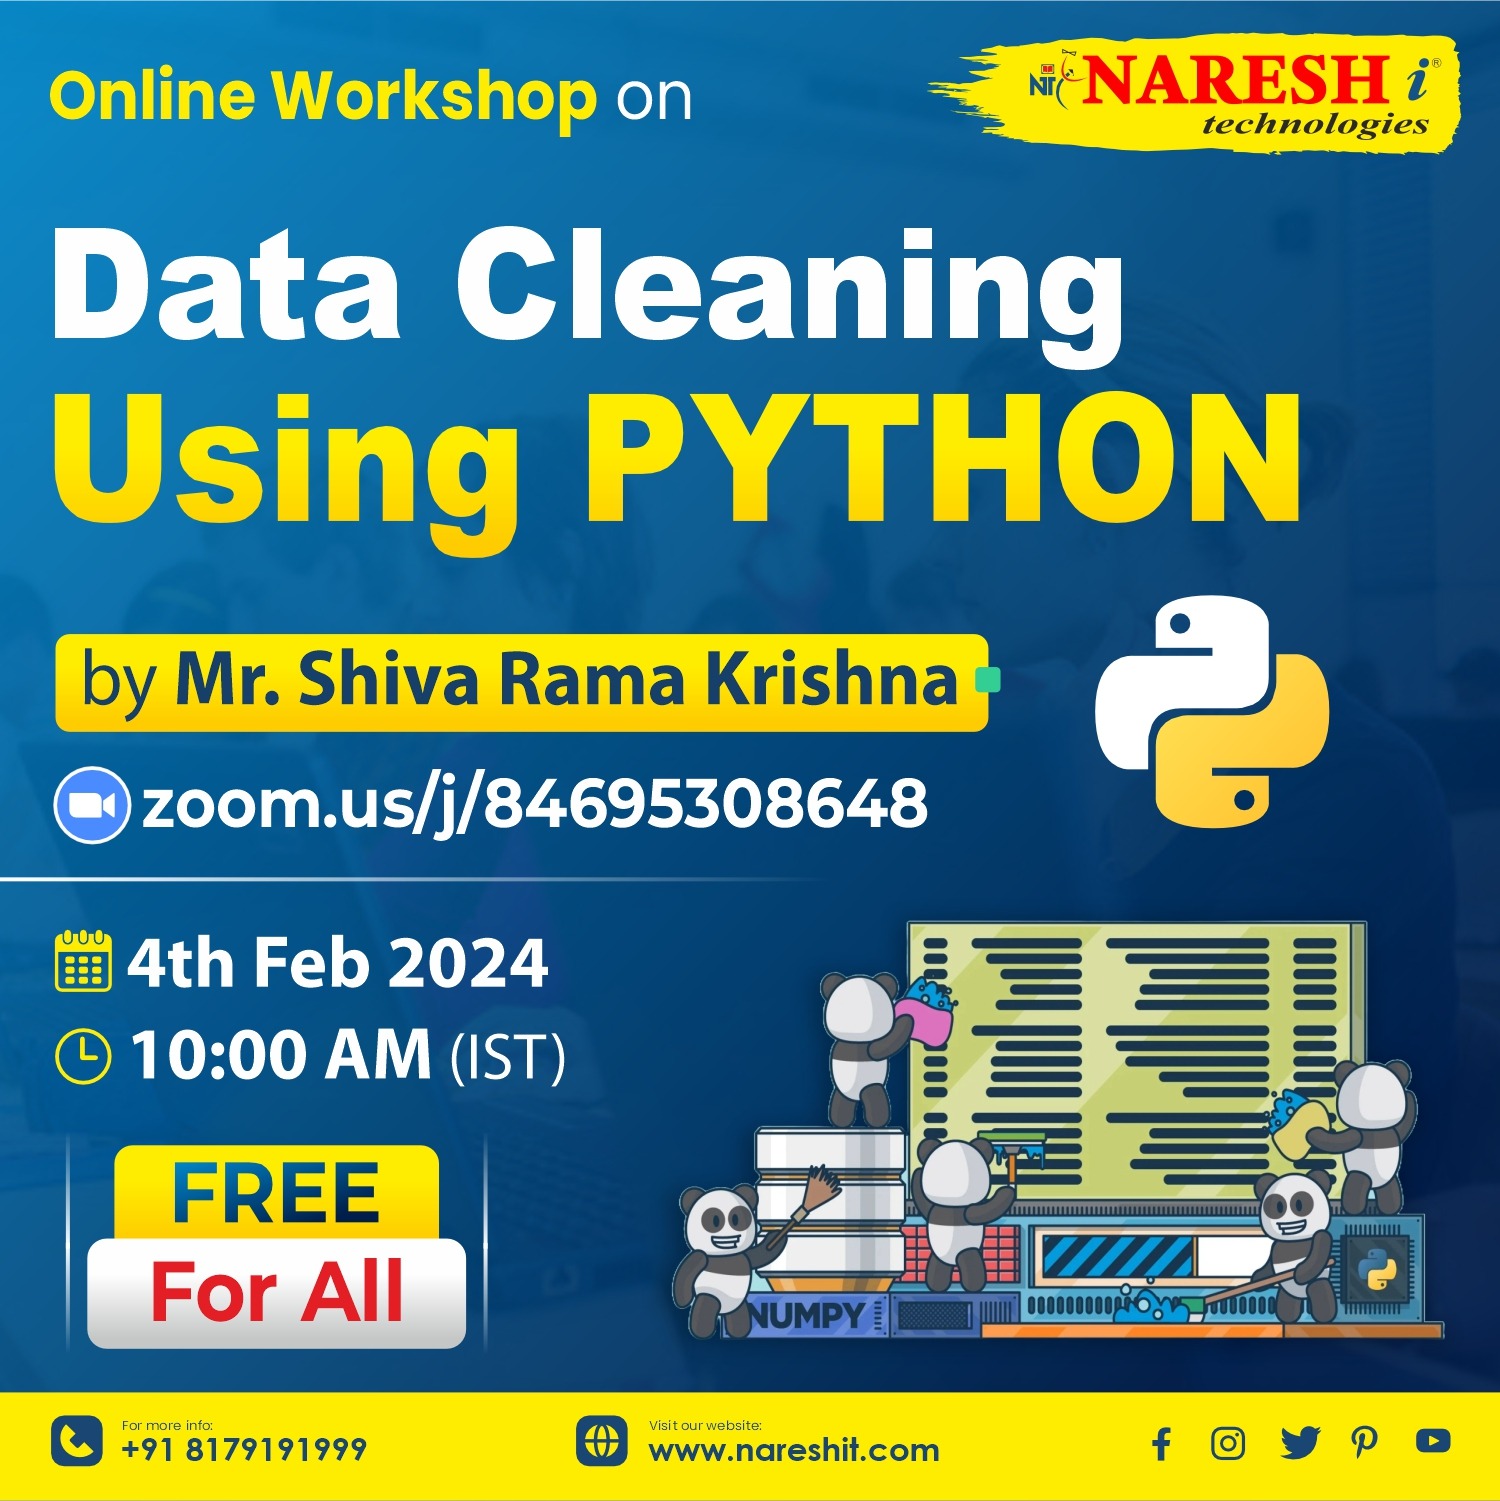 Data Cleaning using Python Free workshop at NareshIT, Online Event